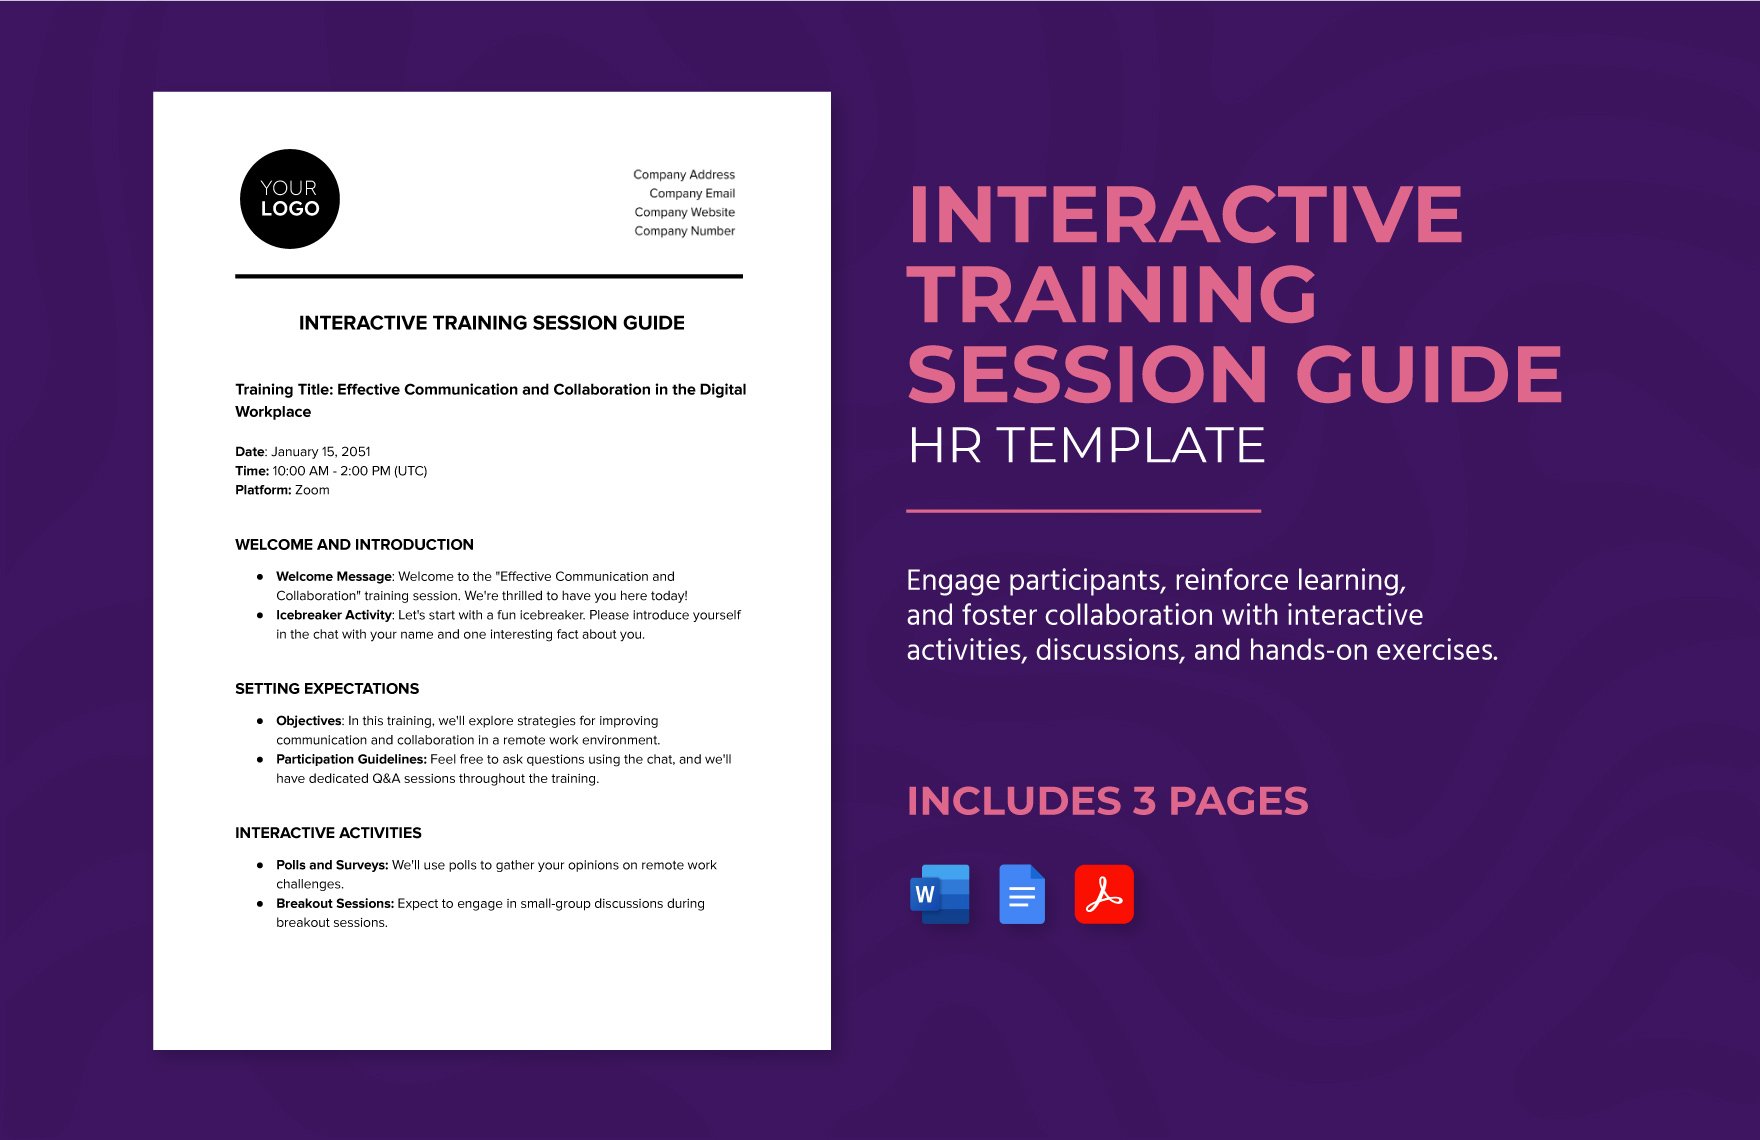 Interactive Training Session Guide HR Template